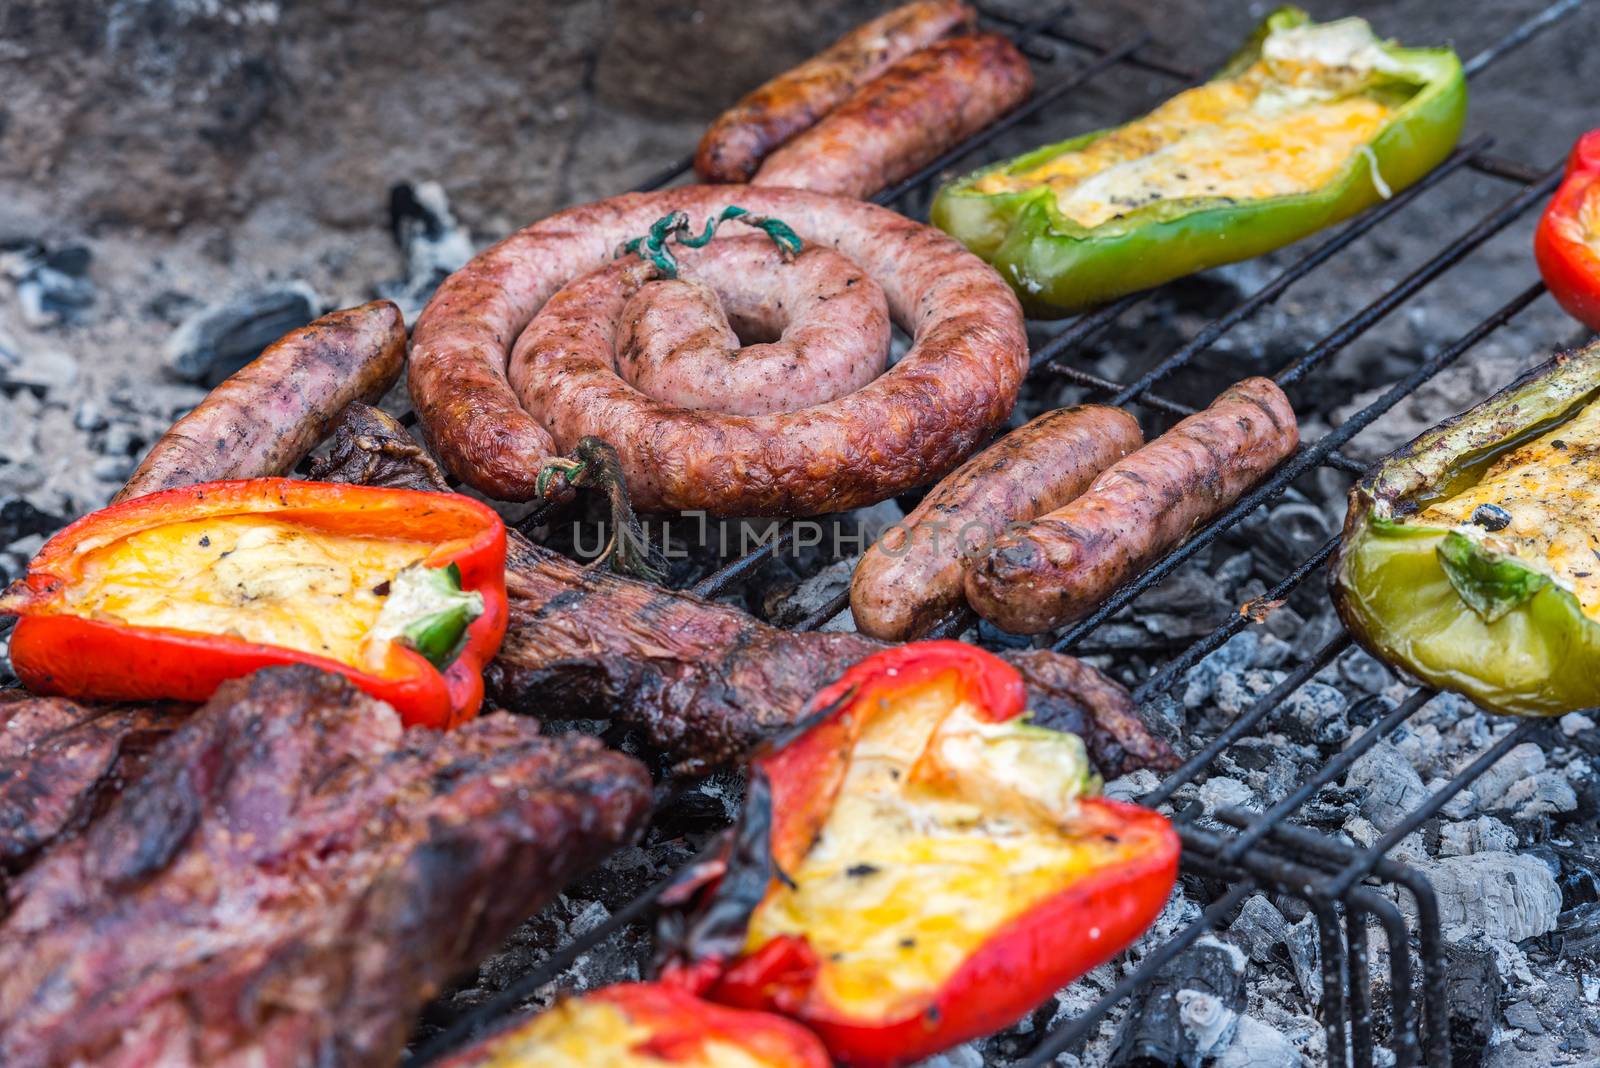 Closeup take of a traditional Argentinian and Uruguayan barbecue by martinscphoto